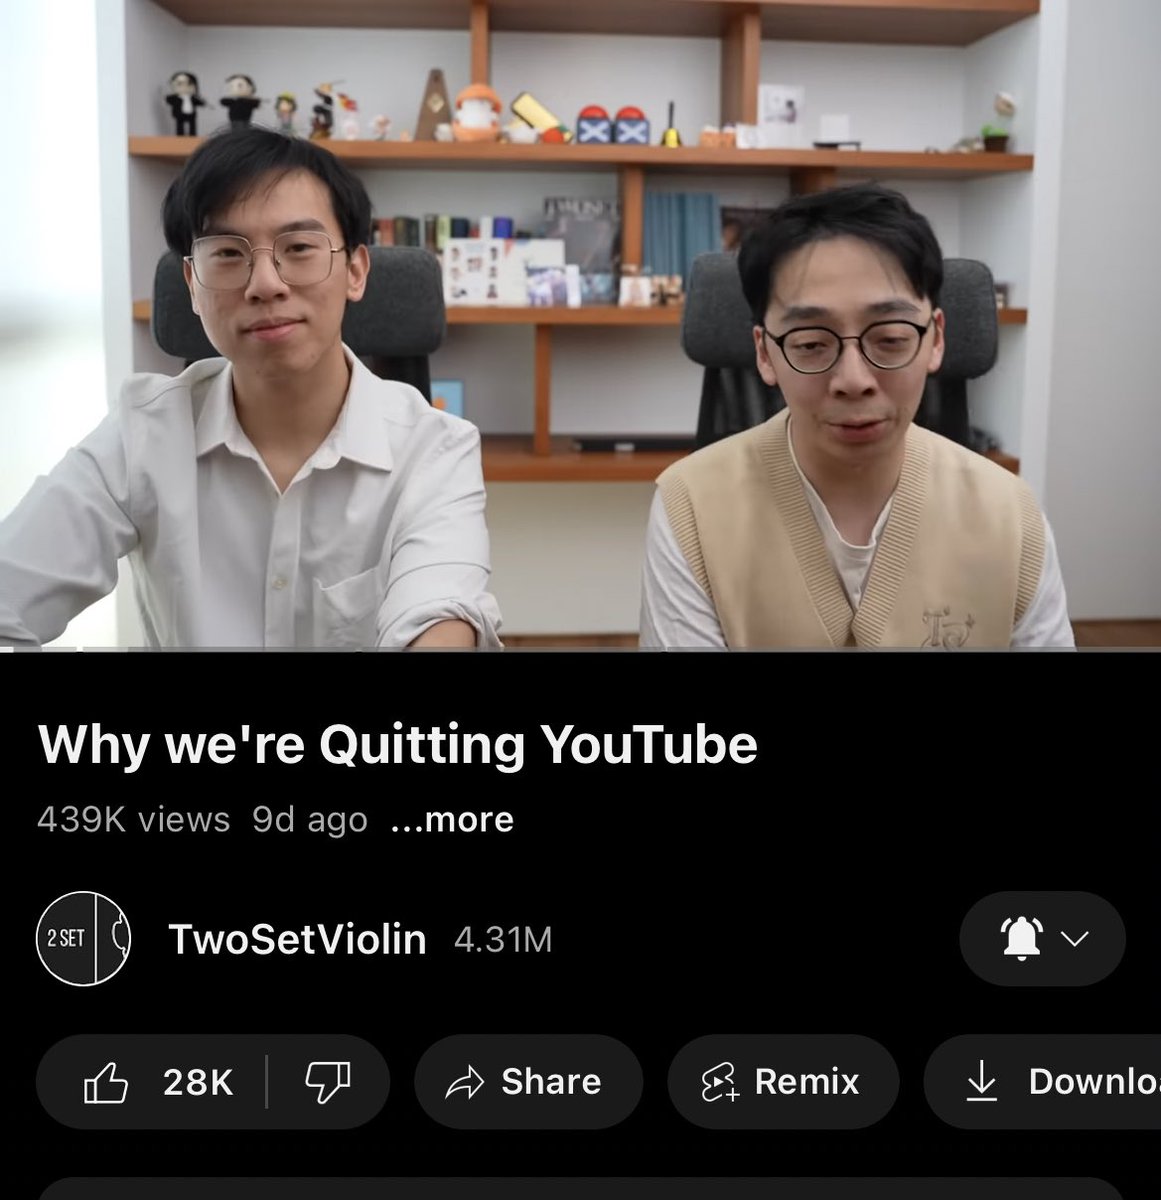 I can tolerate to any kind of lovesick pain, Twoset always hit me hard